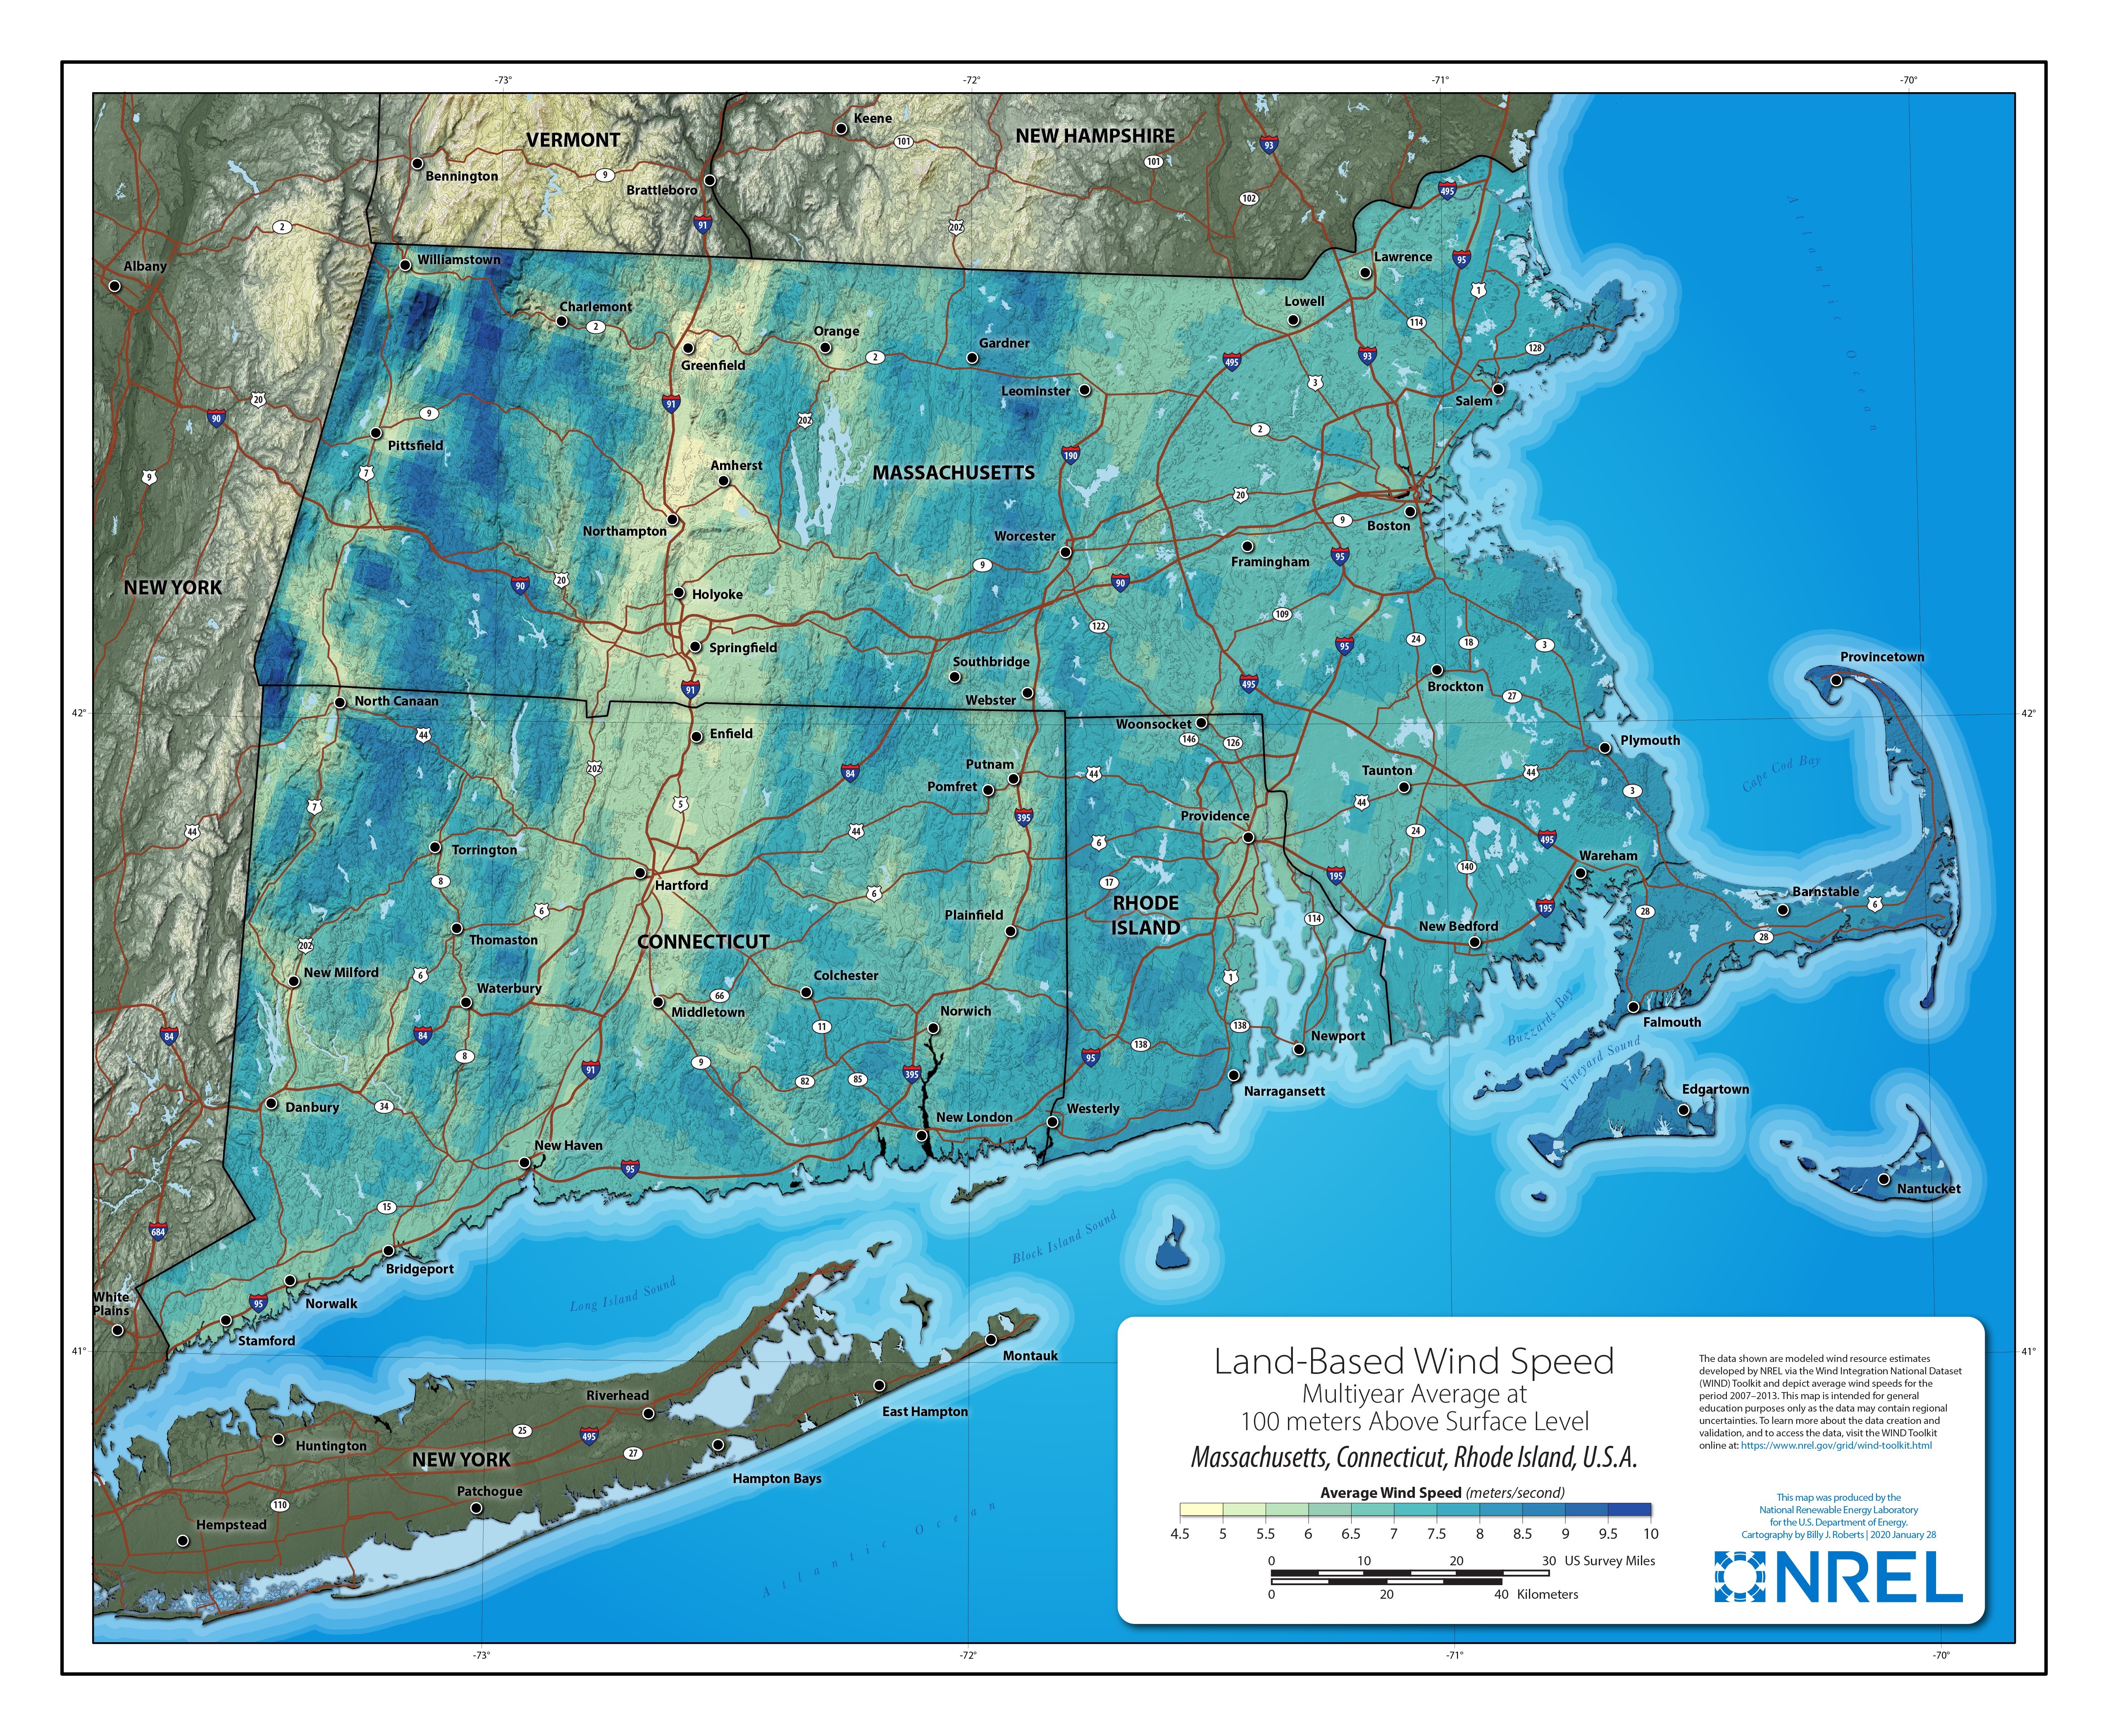 Massachusetts-Connecticut-Rhode Island Land-Based Wind Speed at 100 Meters